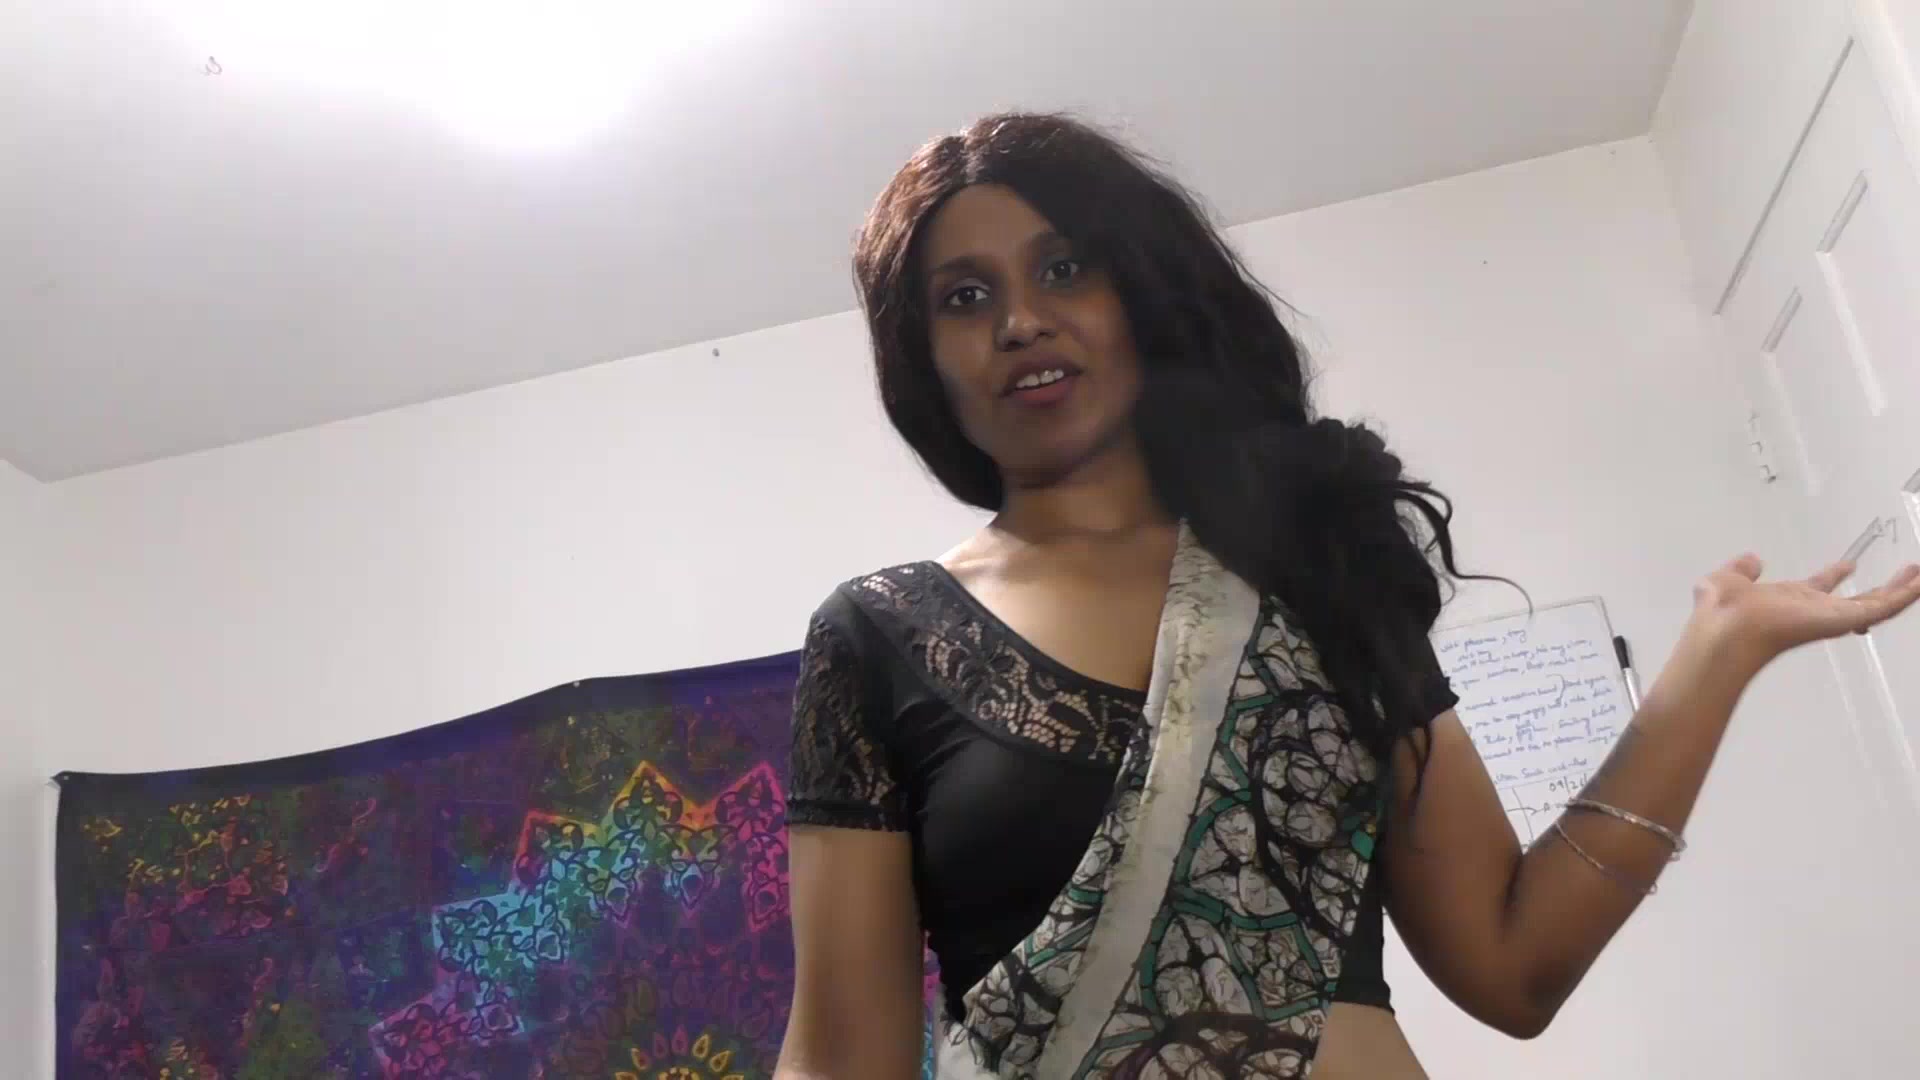 Horny Lily - Nympho Indian Maid Roleplay